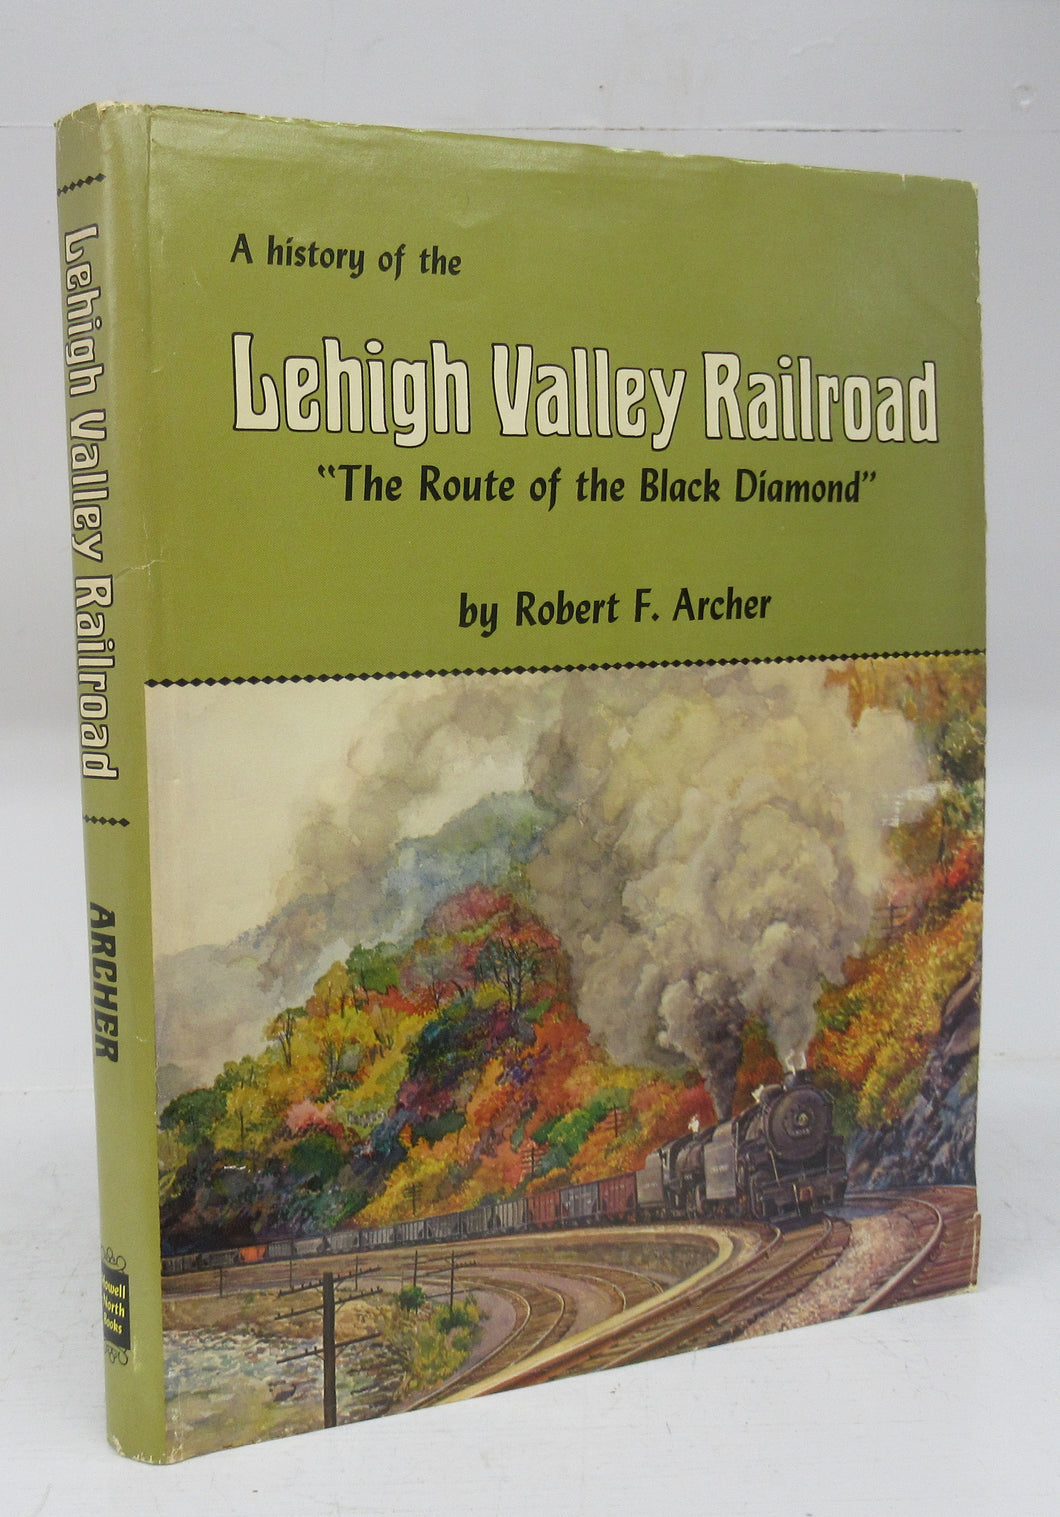 A history of the Lehigh Valley Railroad 